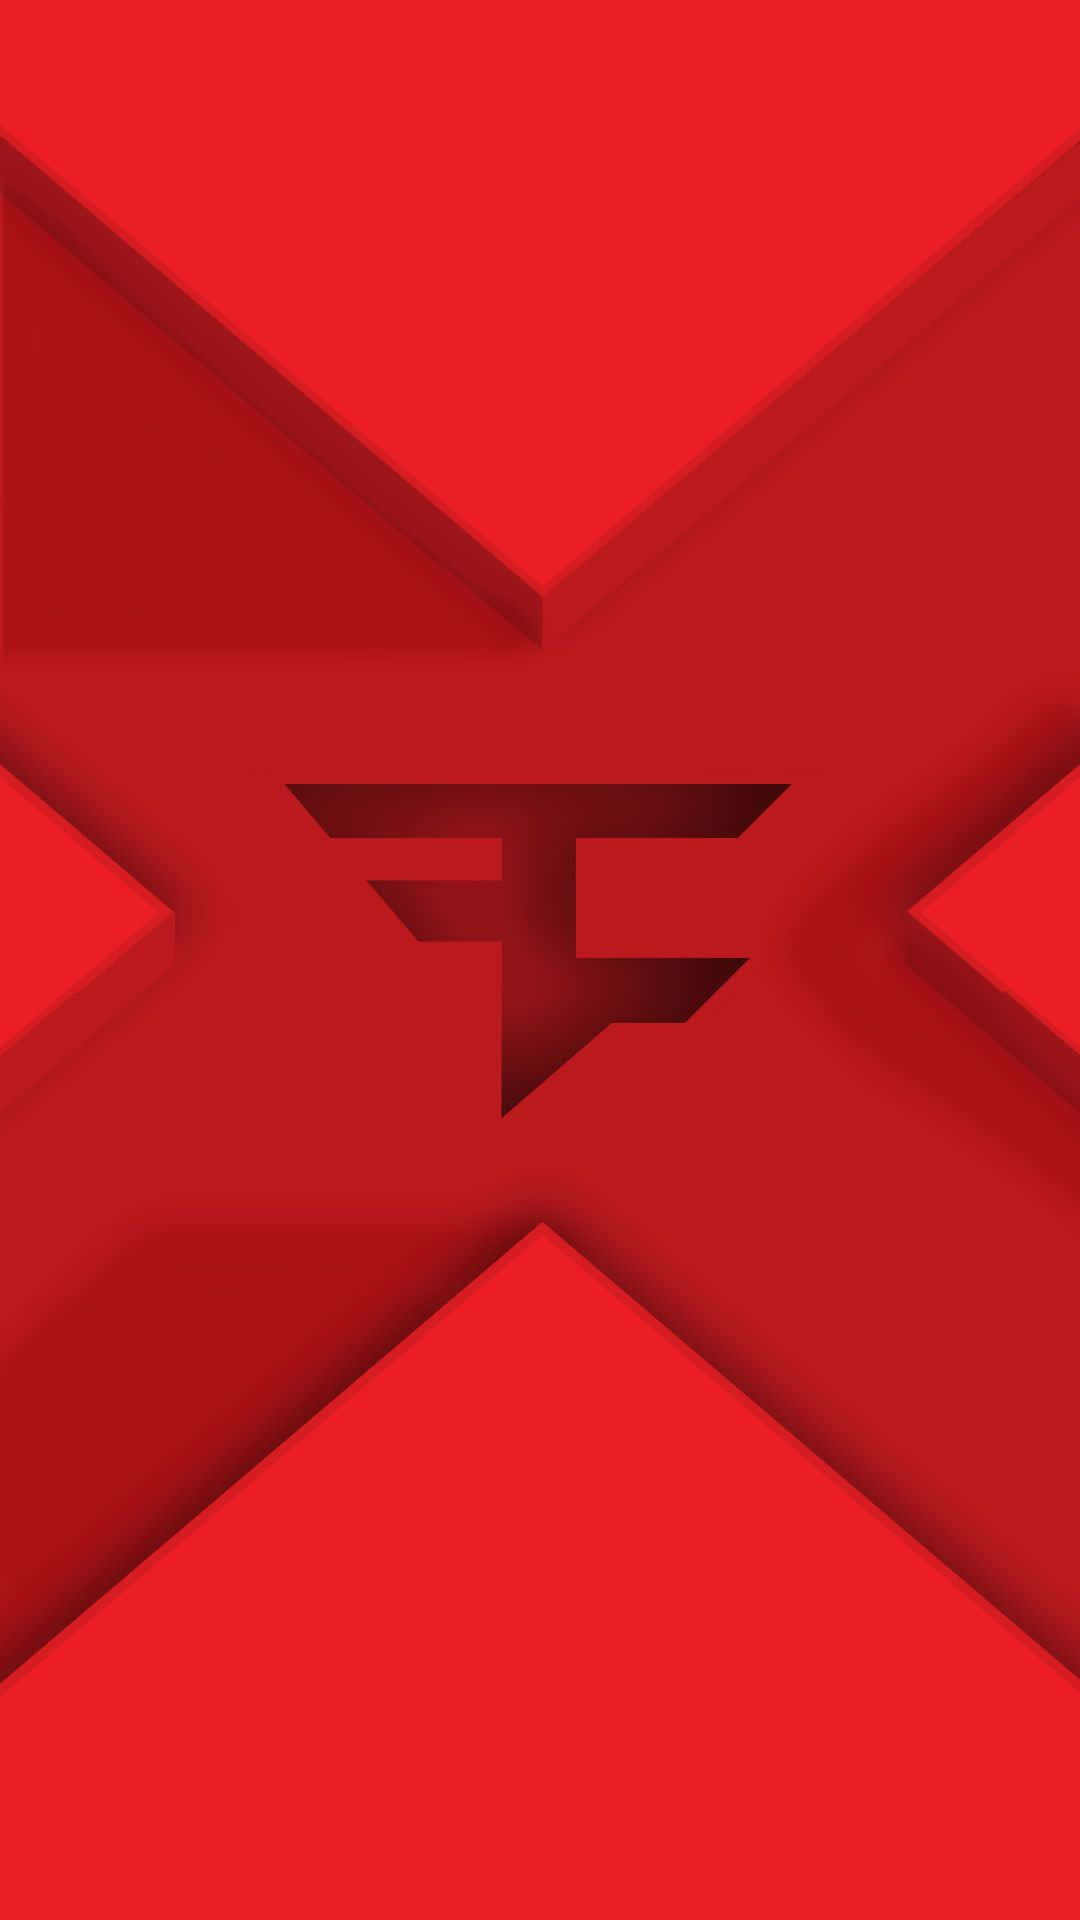 Faze Rug – a successful YouTuber, vlogger and social media influencer from San Diego, CA. Wallpaper